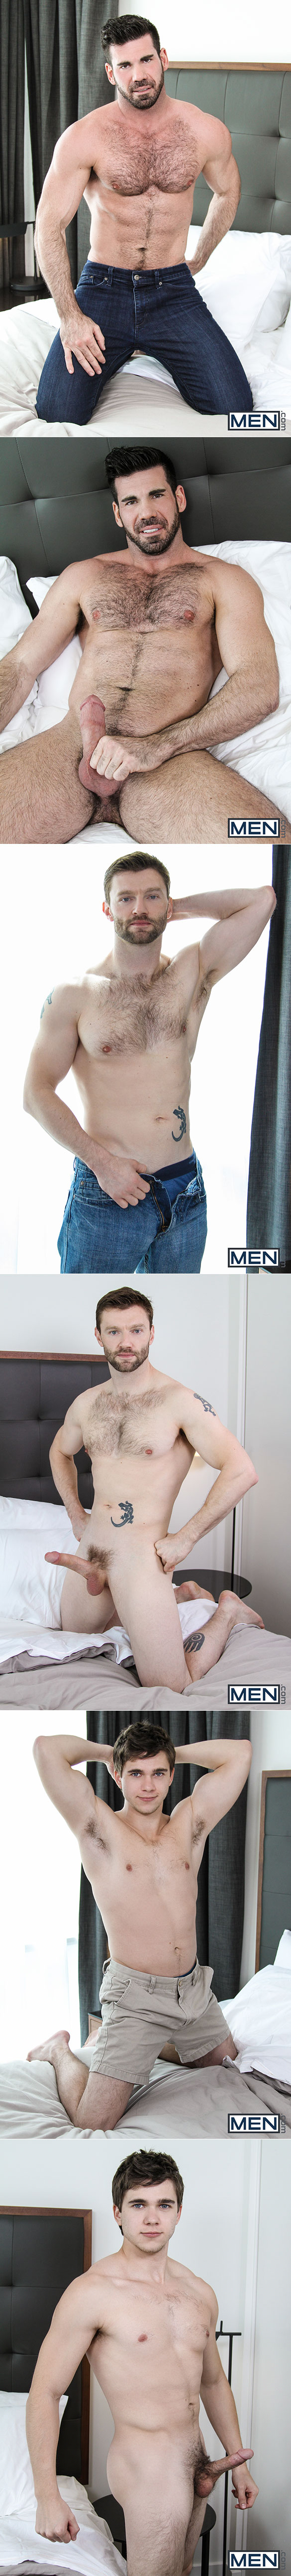 Men.com: Billy Santoro, Dennis West and Will Braun in "A Hollywood Story, Part 2"